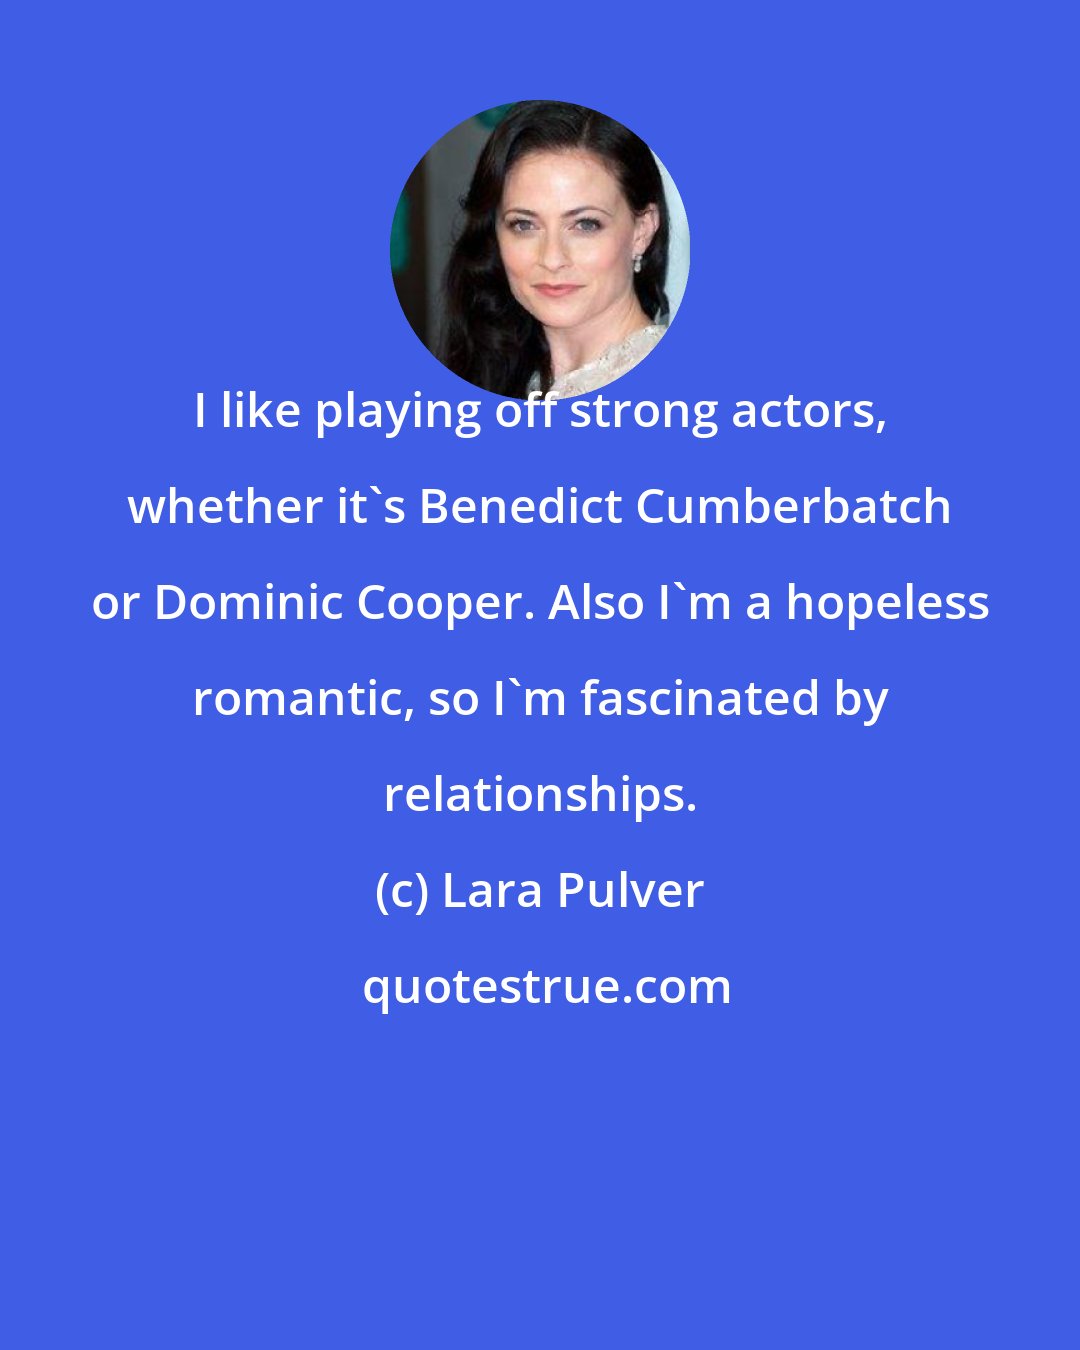 Lara Pulver: I like playing off strong actors, whether it's Benedict Cumberbatch or Dominic Cooper. Also I'm a hopeless romantic, so I'm fascinated by relationships.